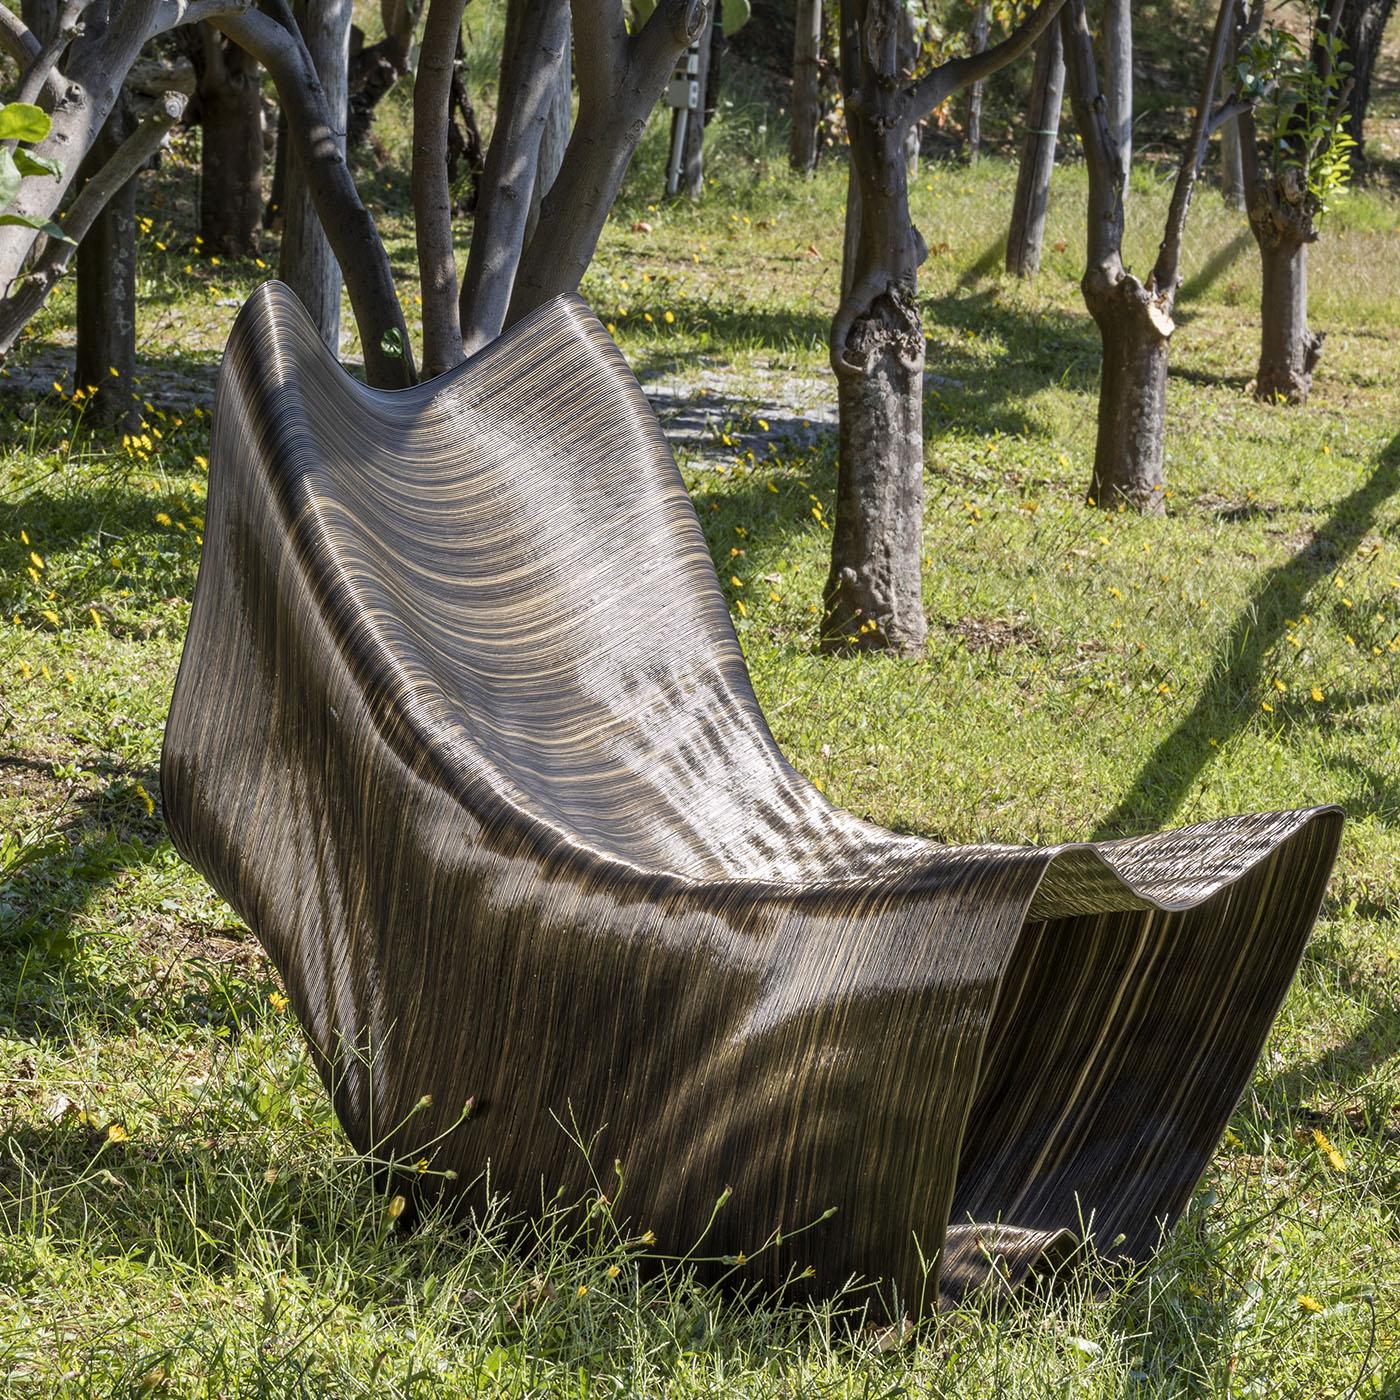 Introducing Vulcano, a 2020 design by Medaarch. This chaise longue, for outdoor spaces like gardens or poolside areas, adds a strong yet gentle presence to its surroundings. Its rippled surface mimics wind-blown water, enhancing its resilience.